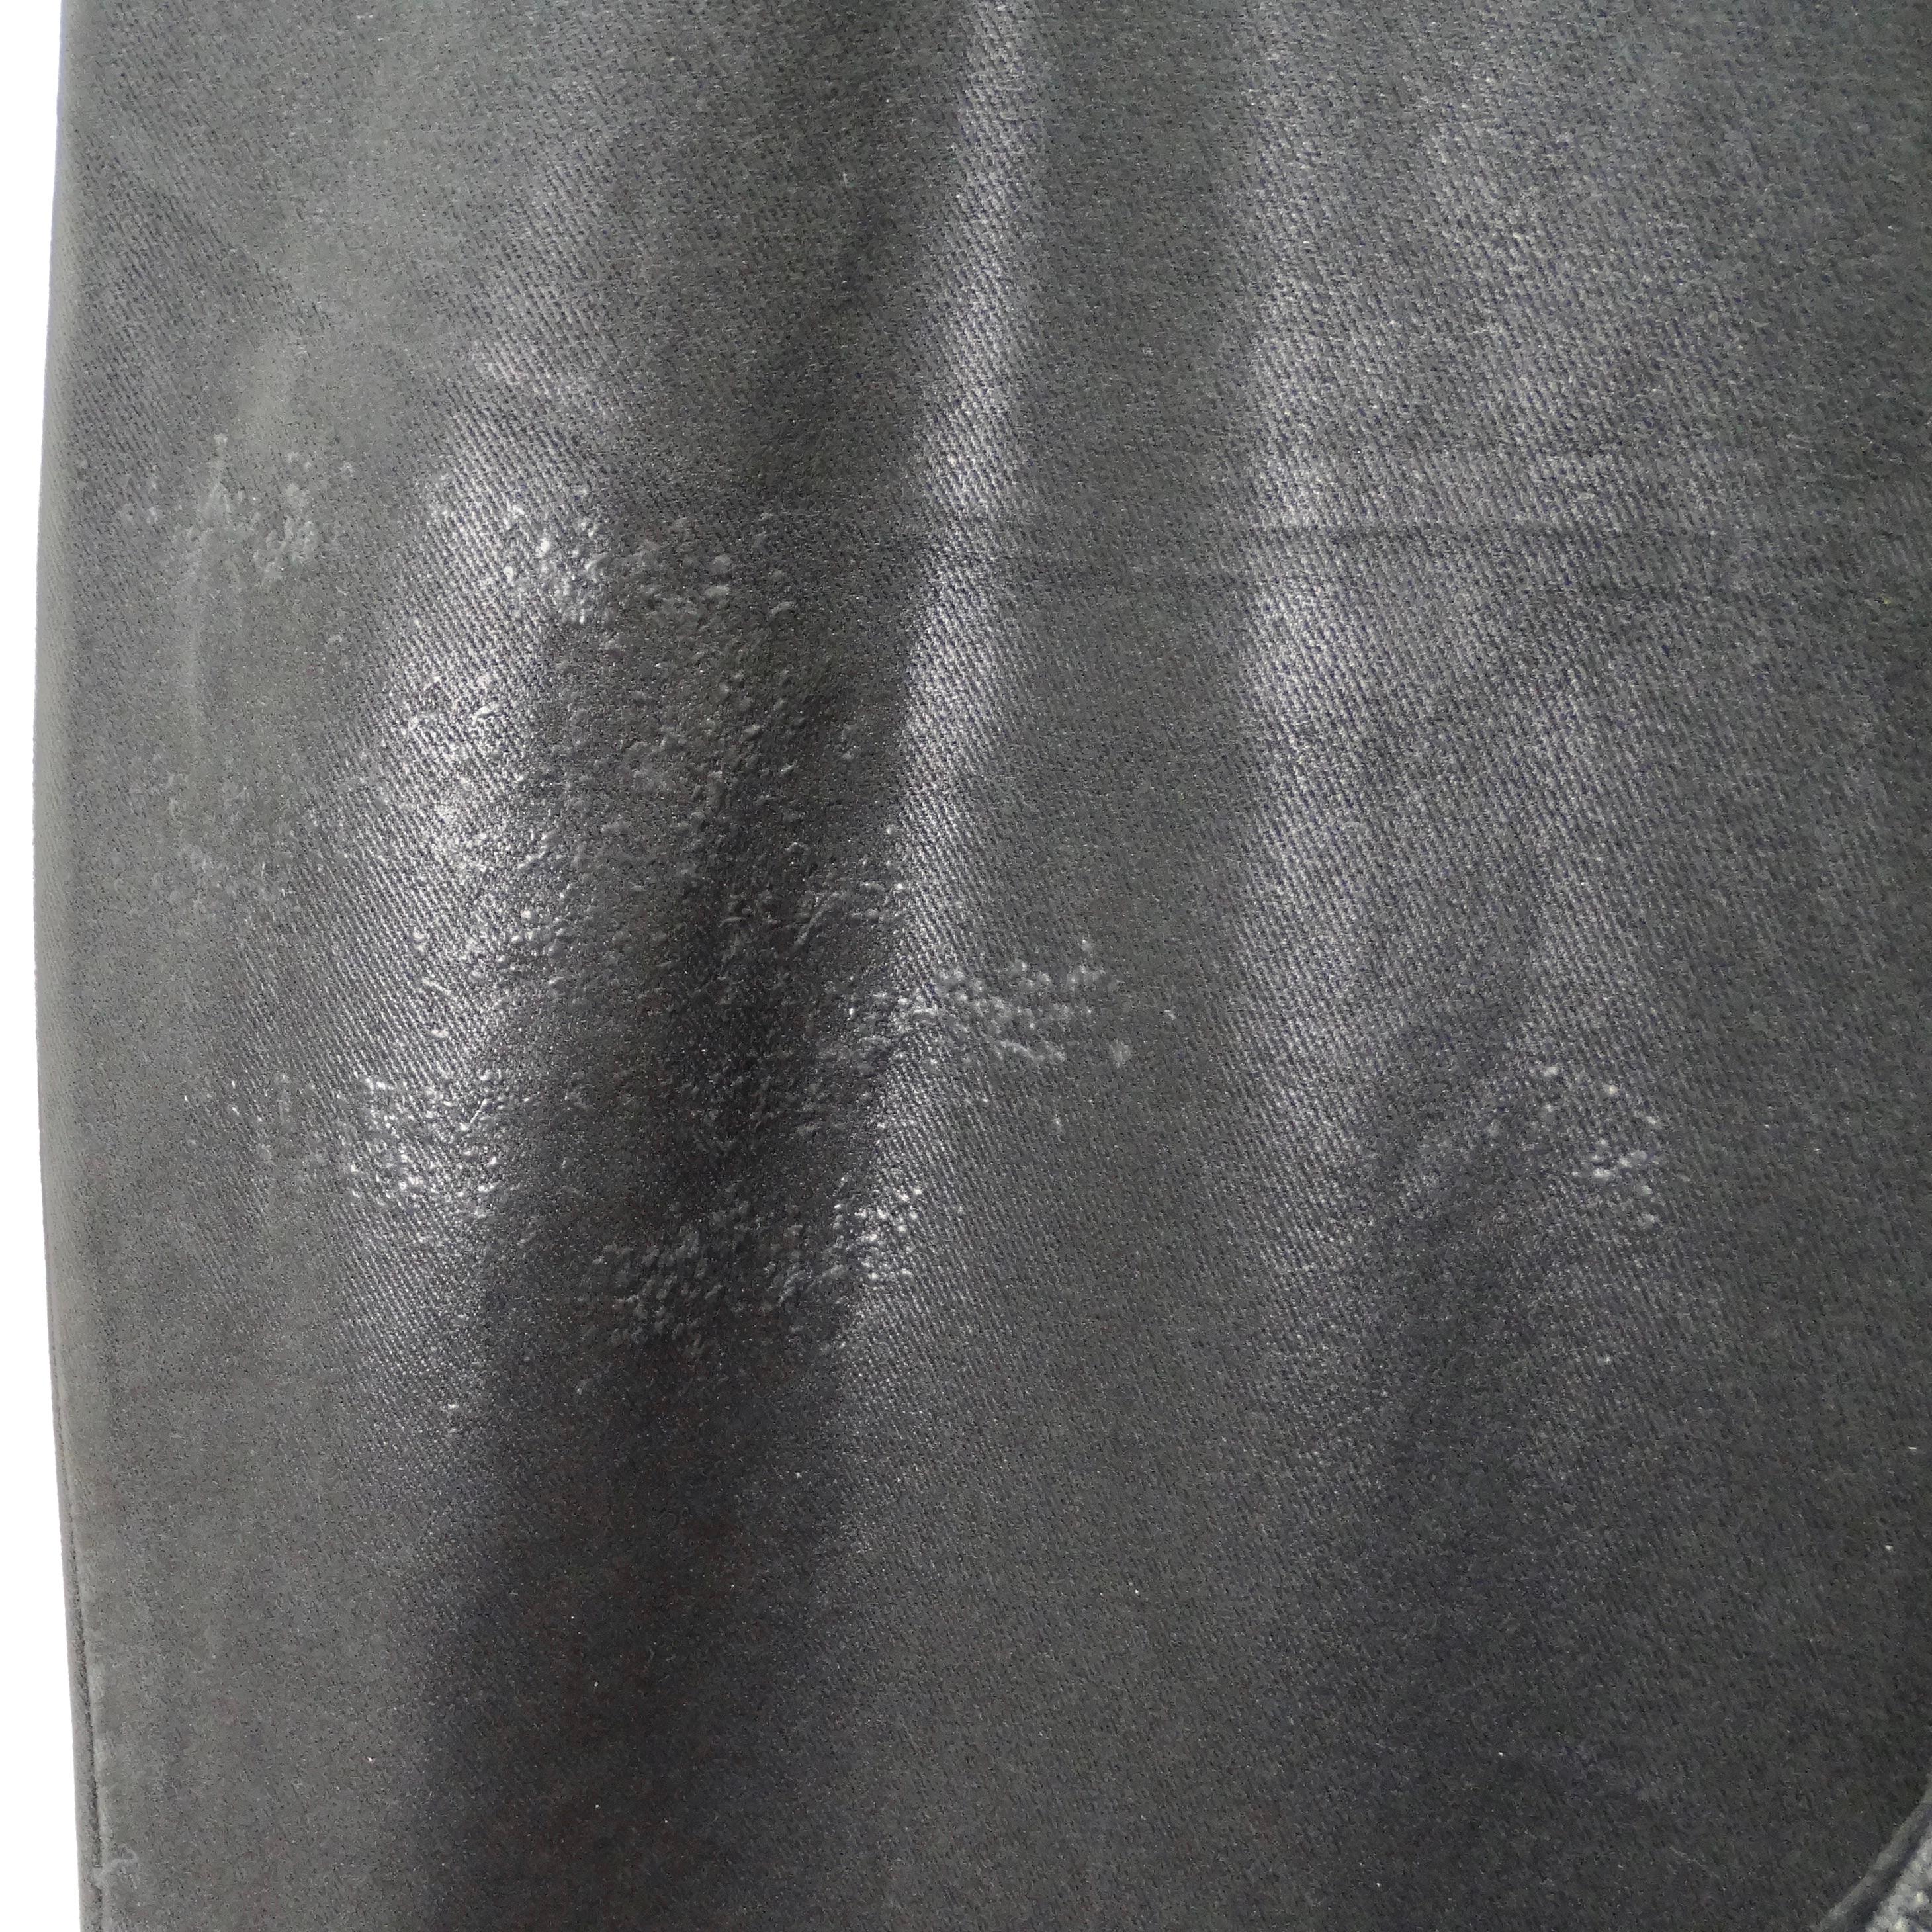 Balenciaga FW 2022 Wax Coated Black Baggy Jeans In Excellent Condition For Sale In Scottsdale, AZ